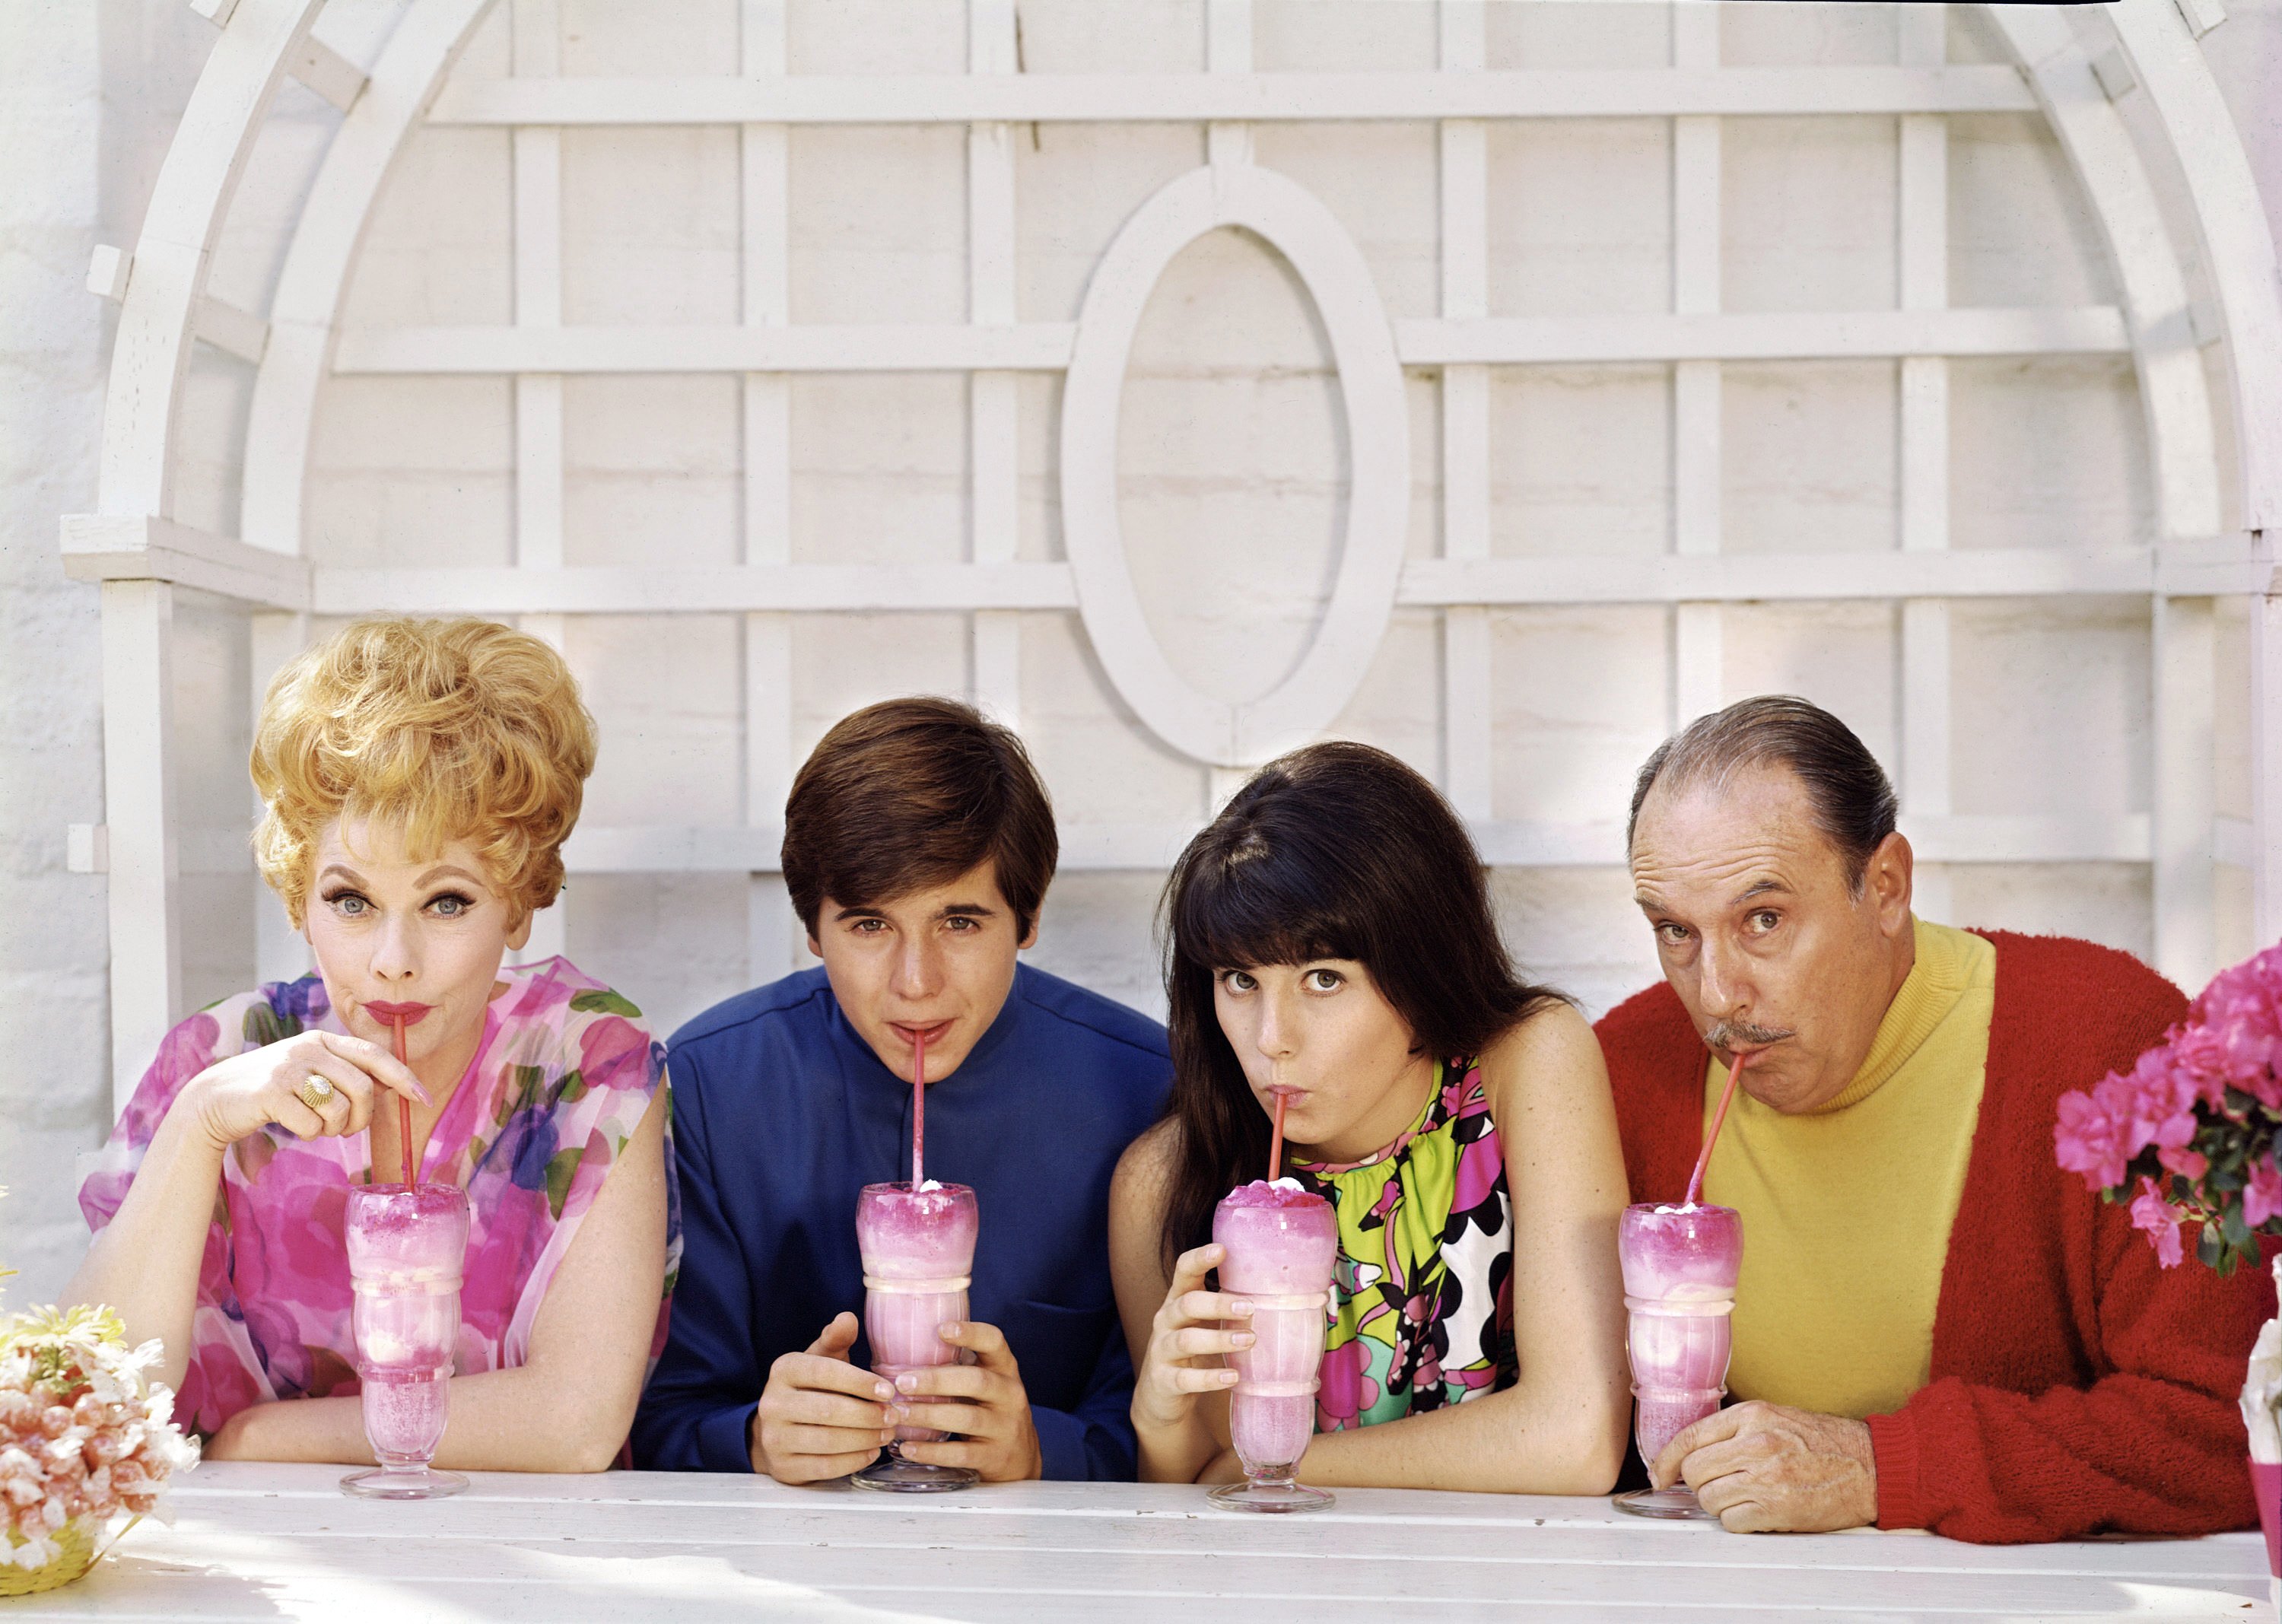 Lucille Ball; Desi Arnaz, Jr.; Lucie Arnaz and Gale Gordon on "Here's Lucy" in 1969 | Source: Getty Images 